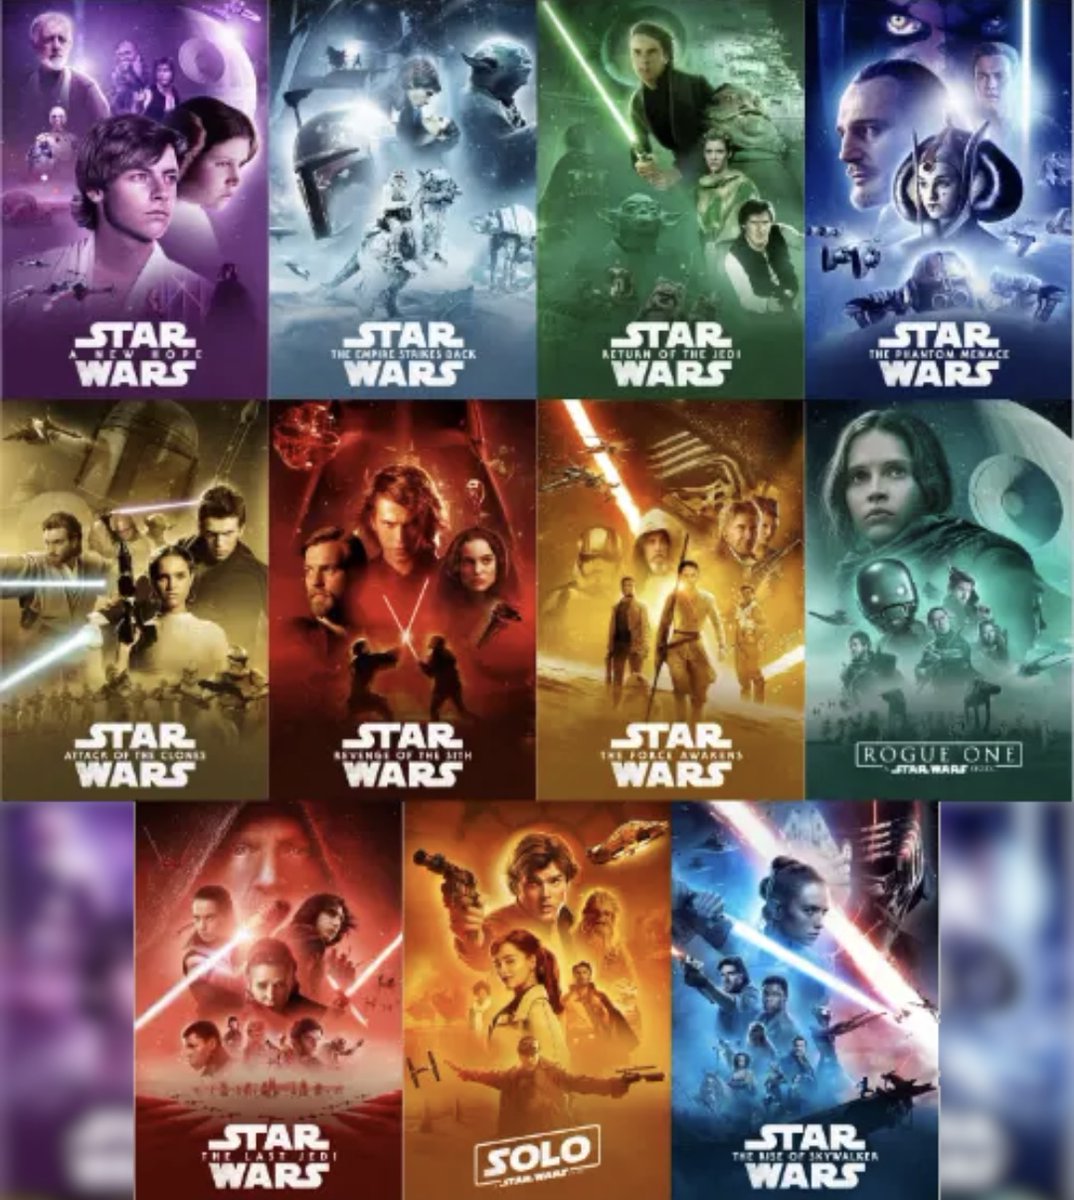 May the 4th be with you. Always. What are your 3 favorite Star Wars films?